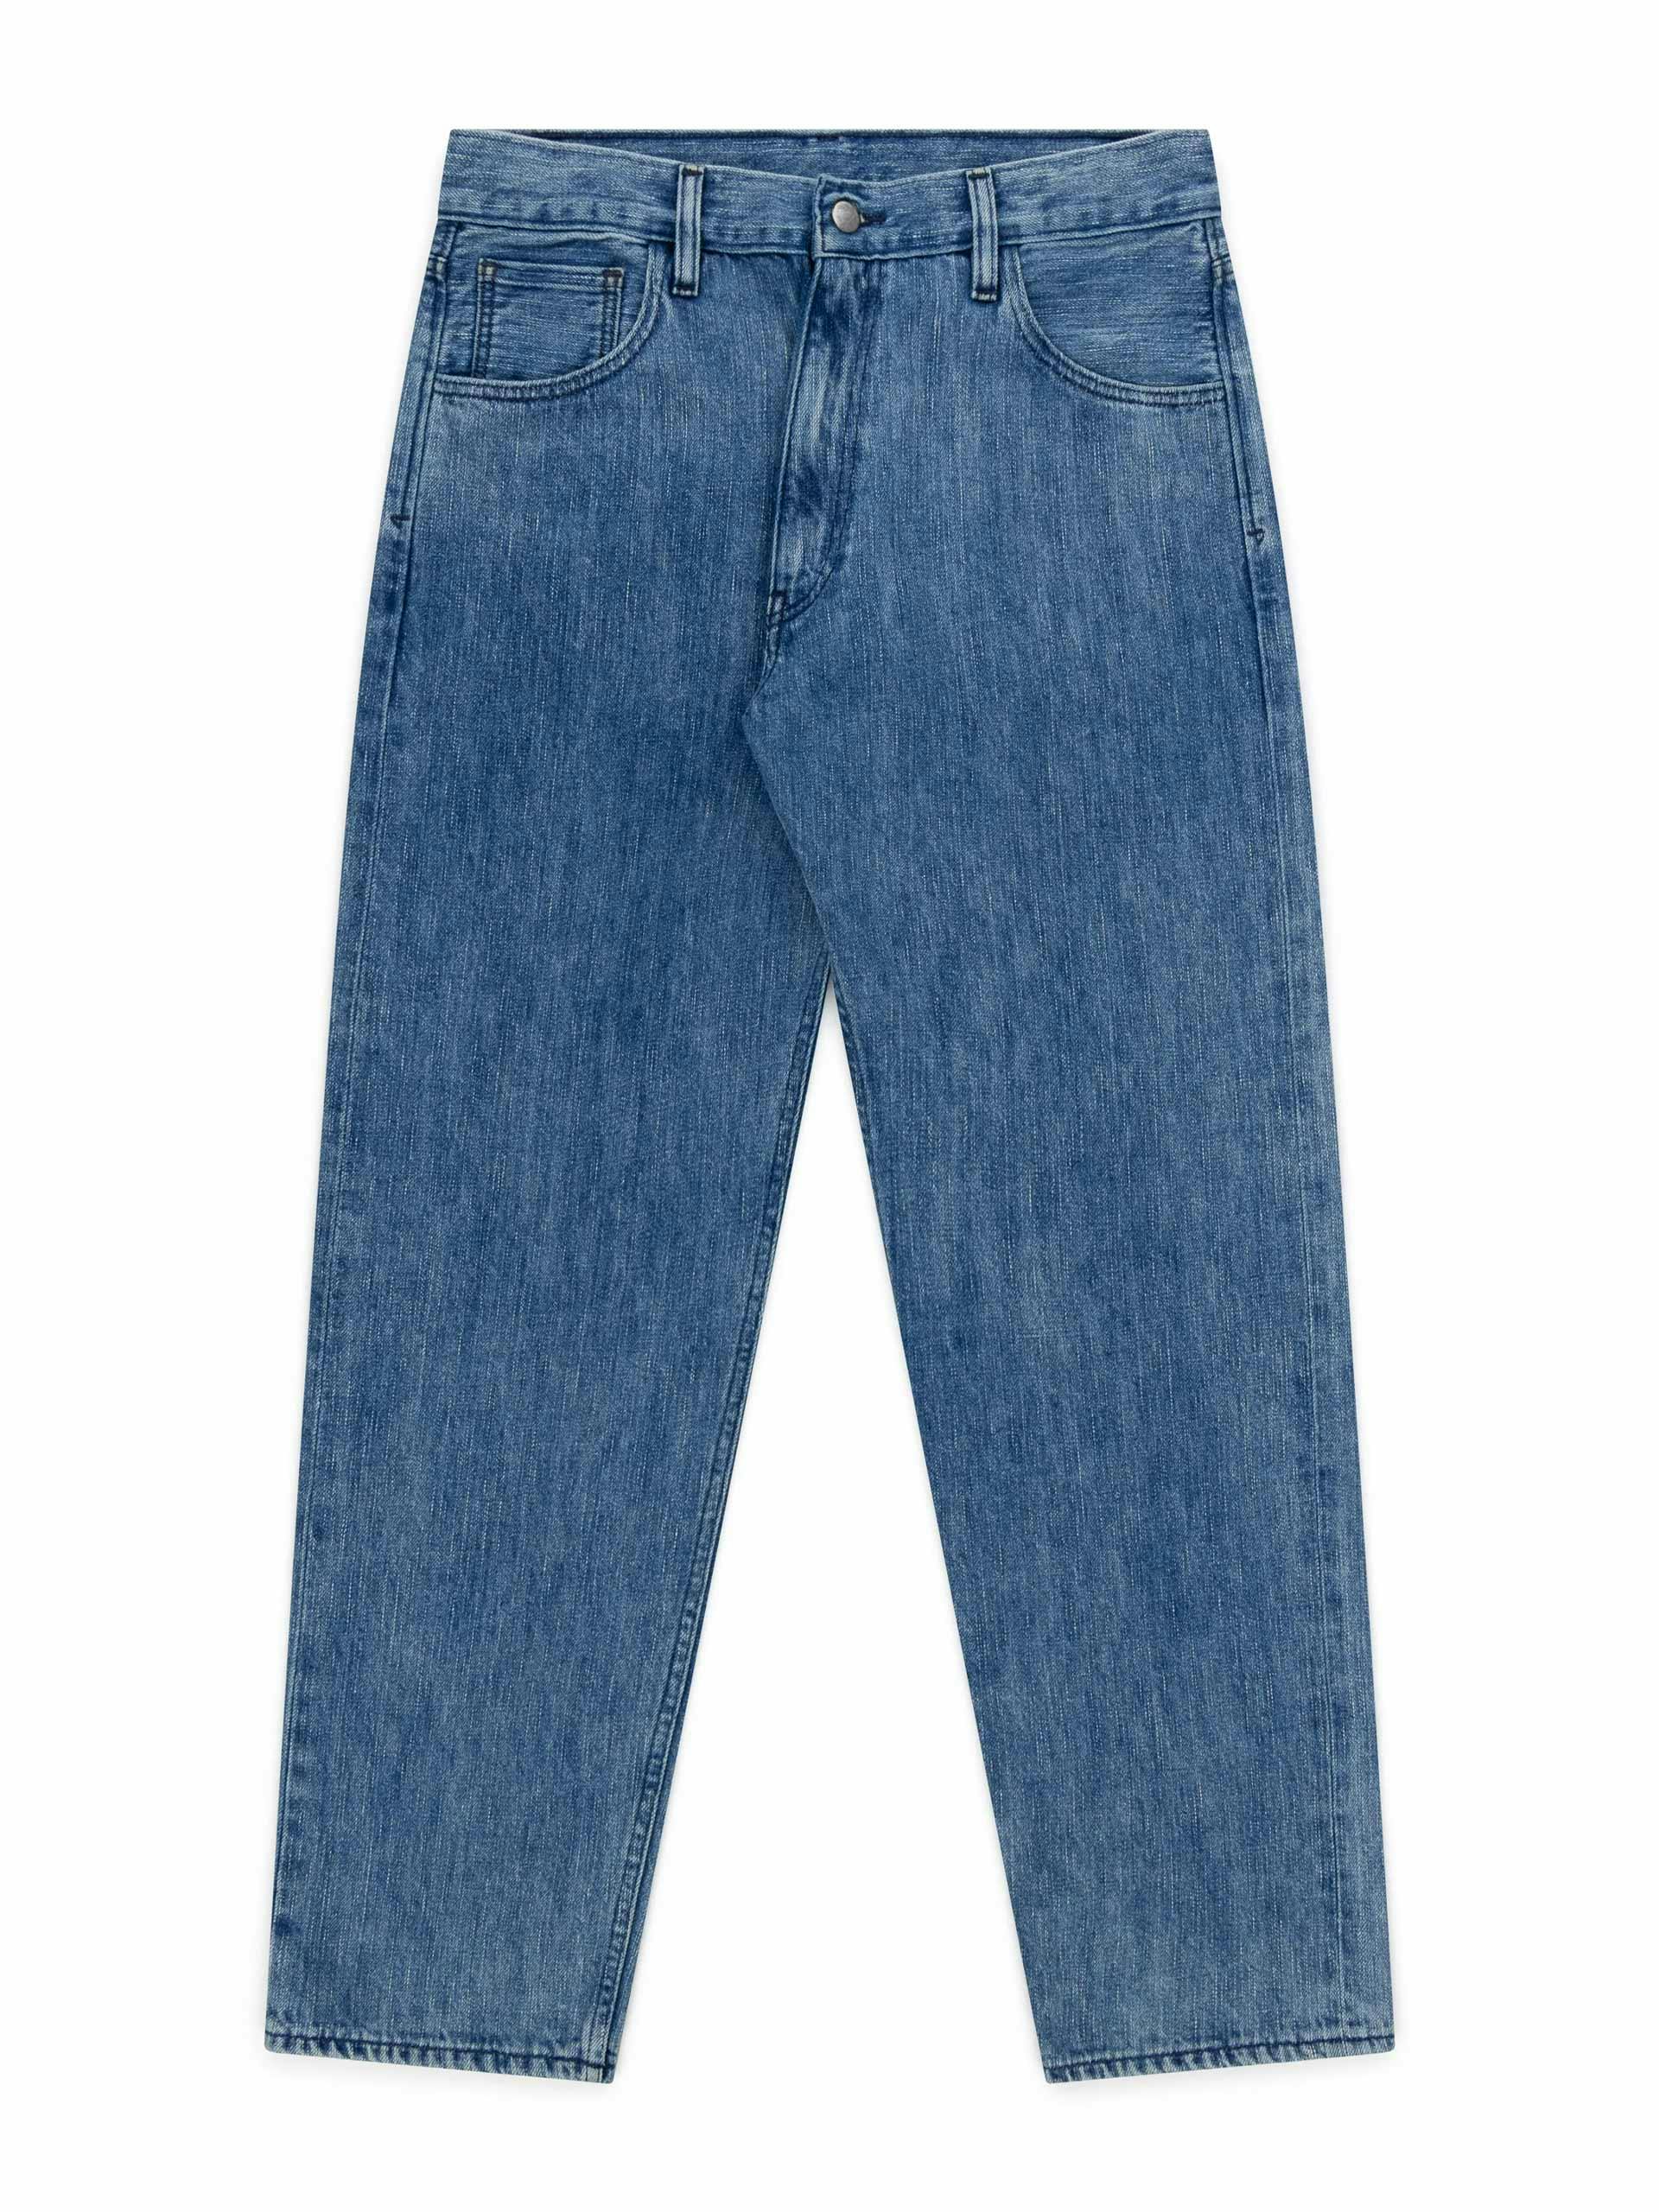 Blue acid wash relaxed fit jeans